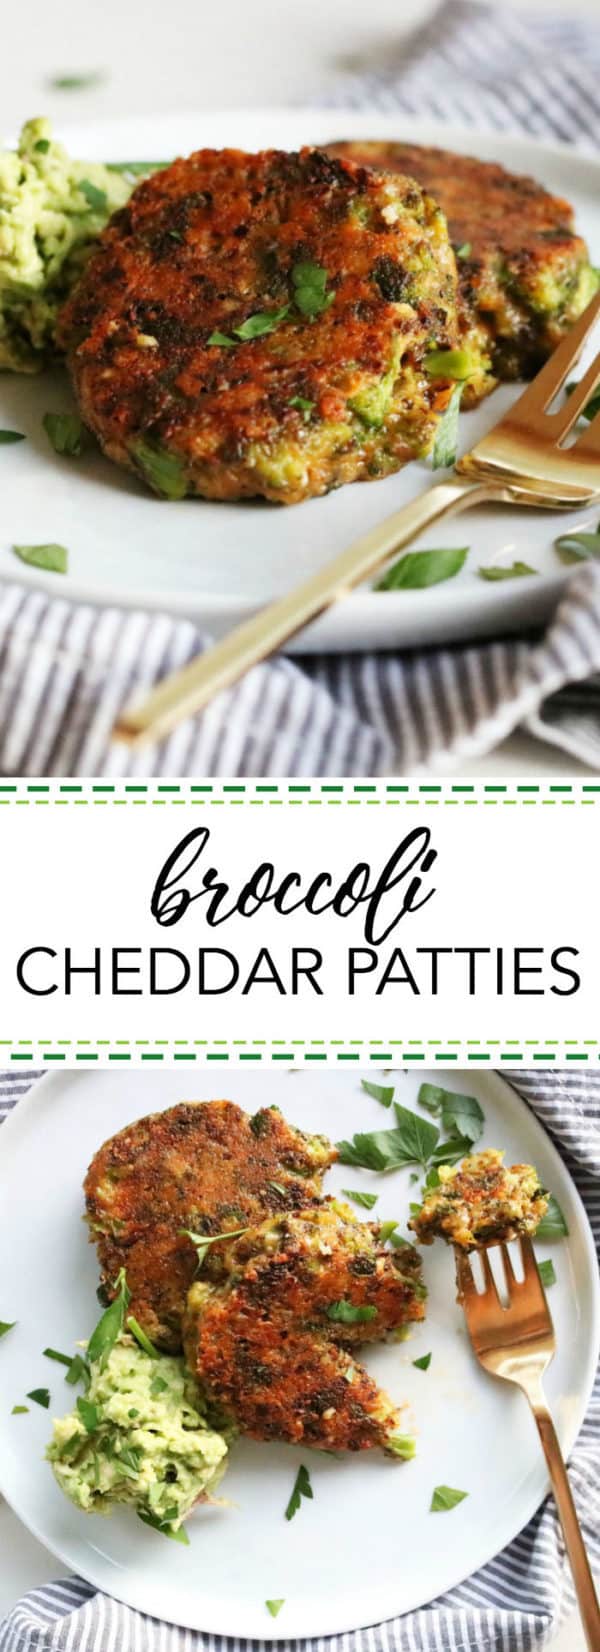 Broccoli Cheddar Patties - The Toasted Pine Nut